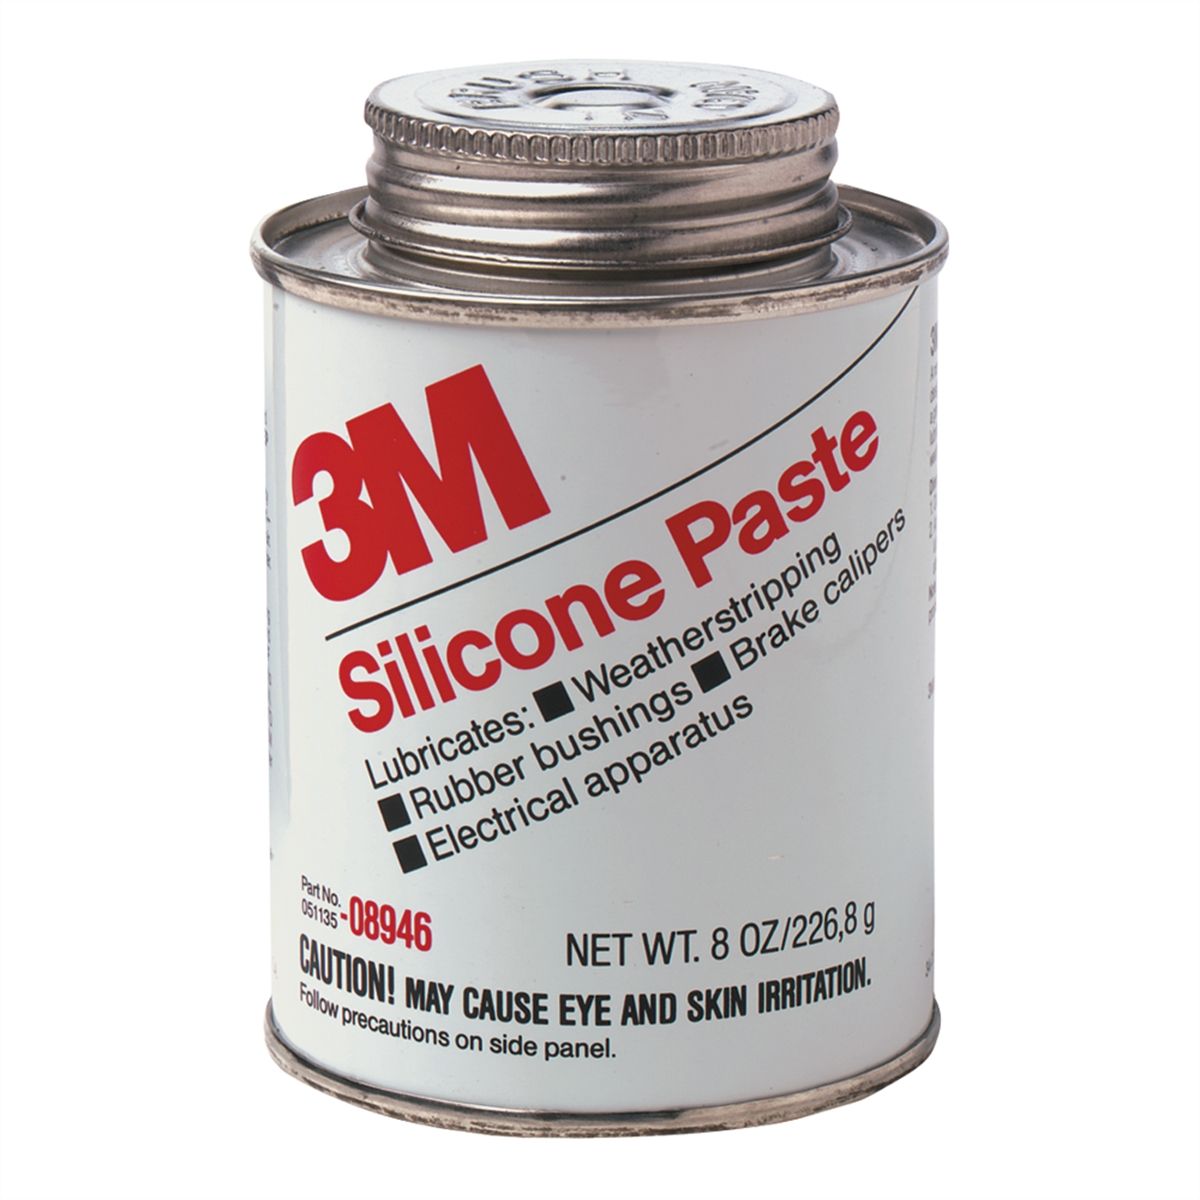 08946 3M Multi Purpose Lubricant Used To Lubricate Brake Systems/ 